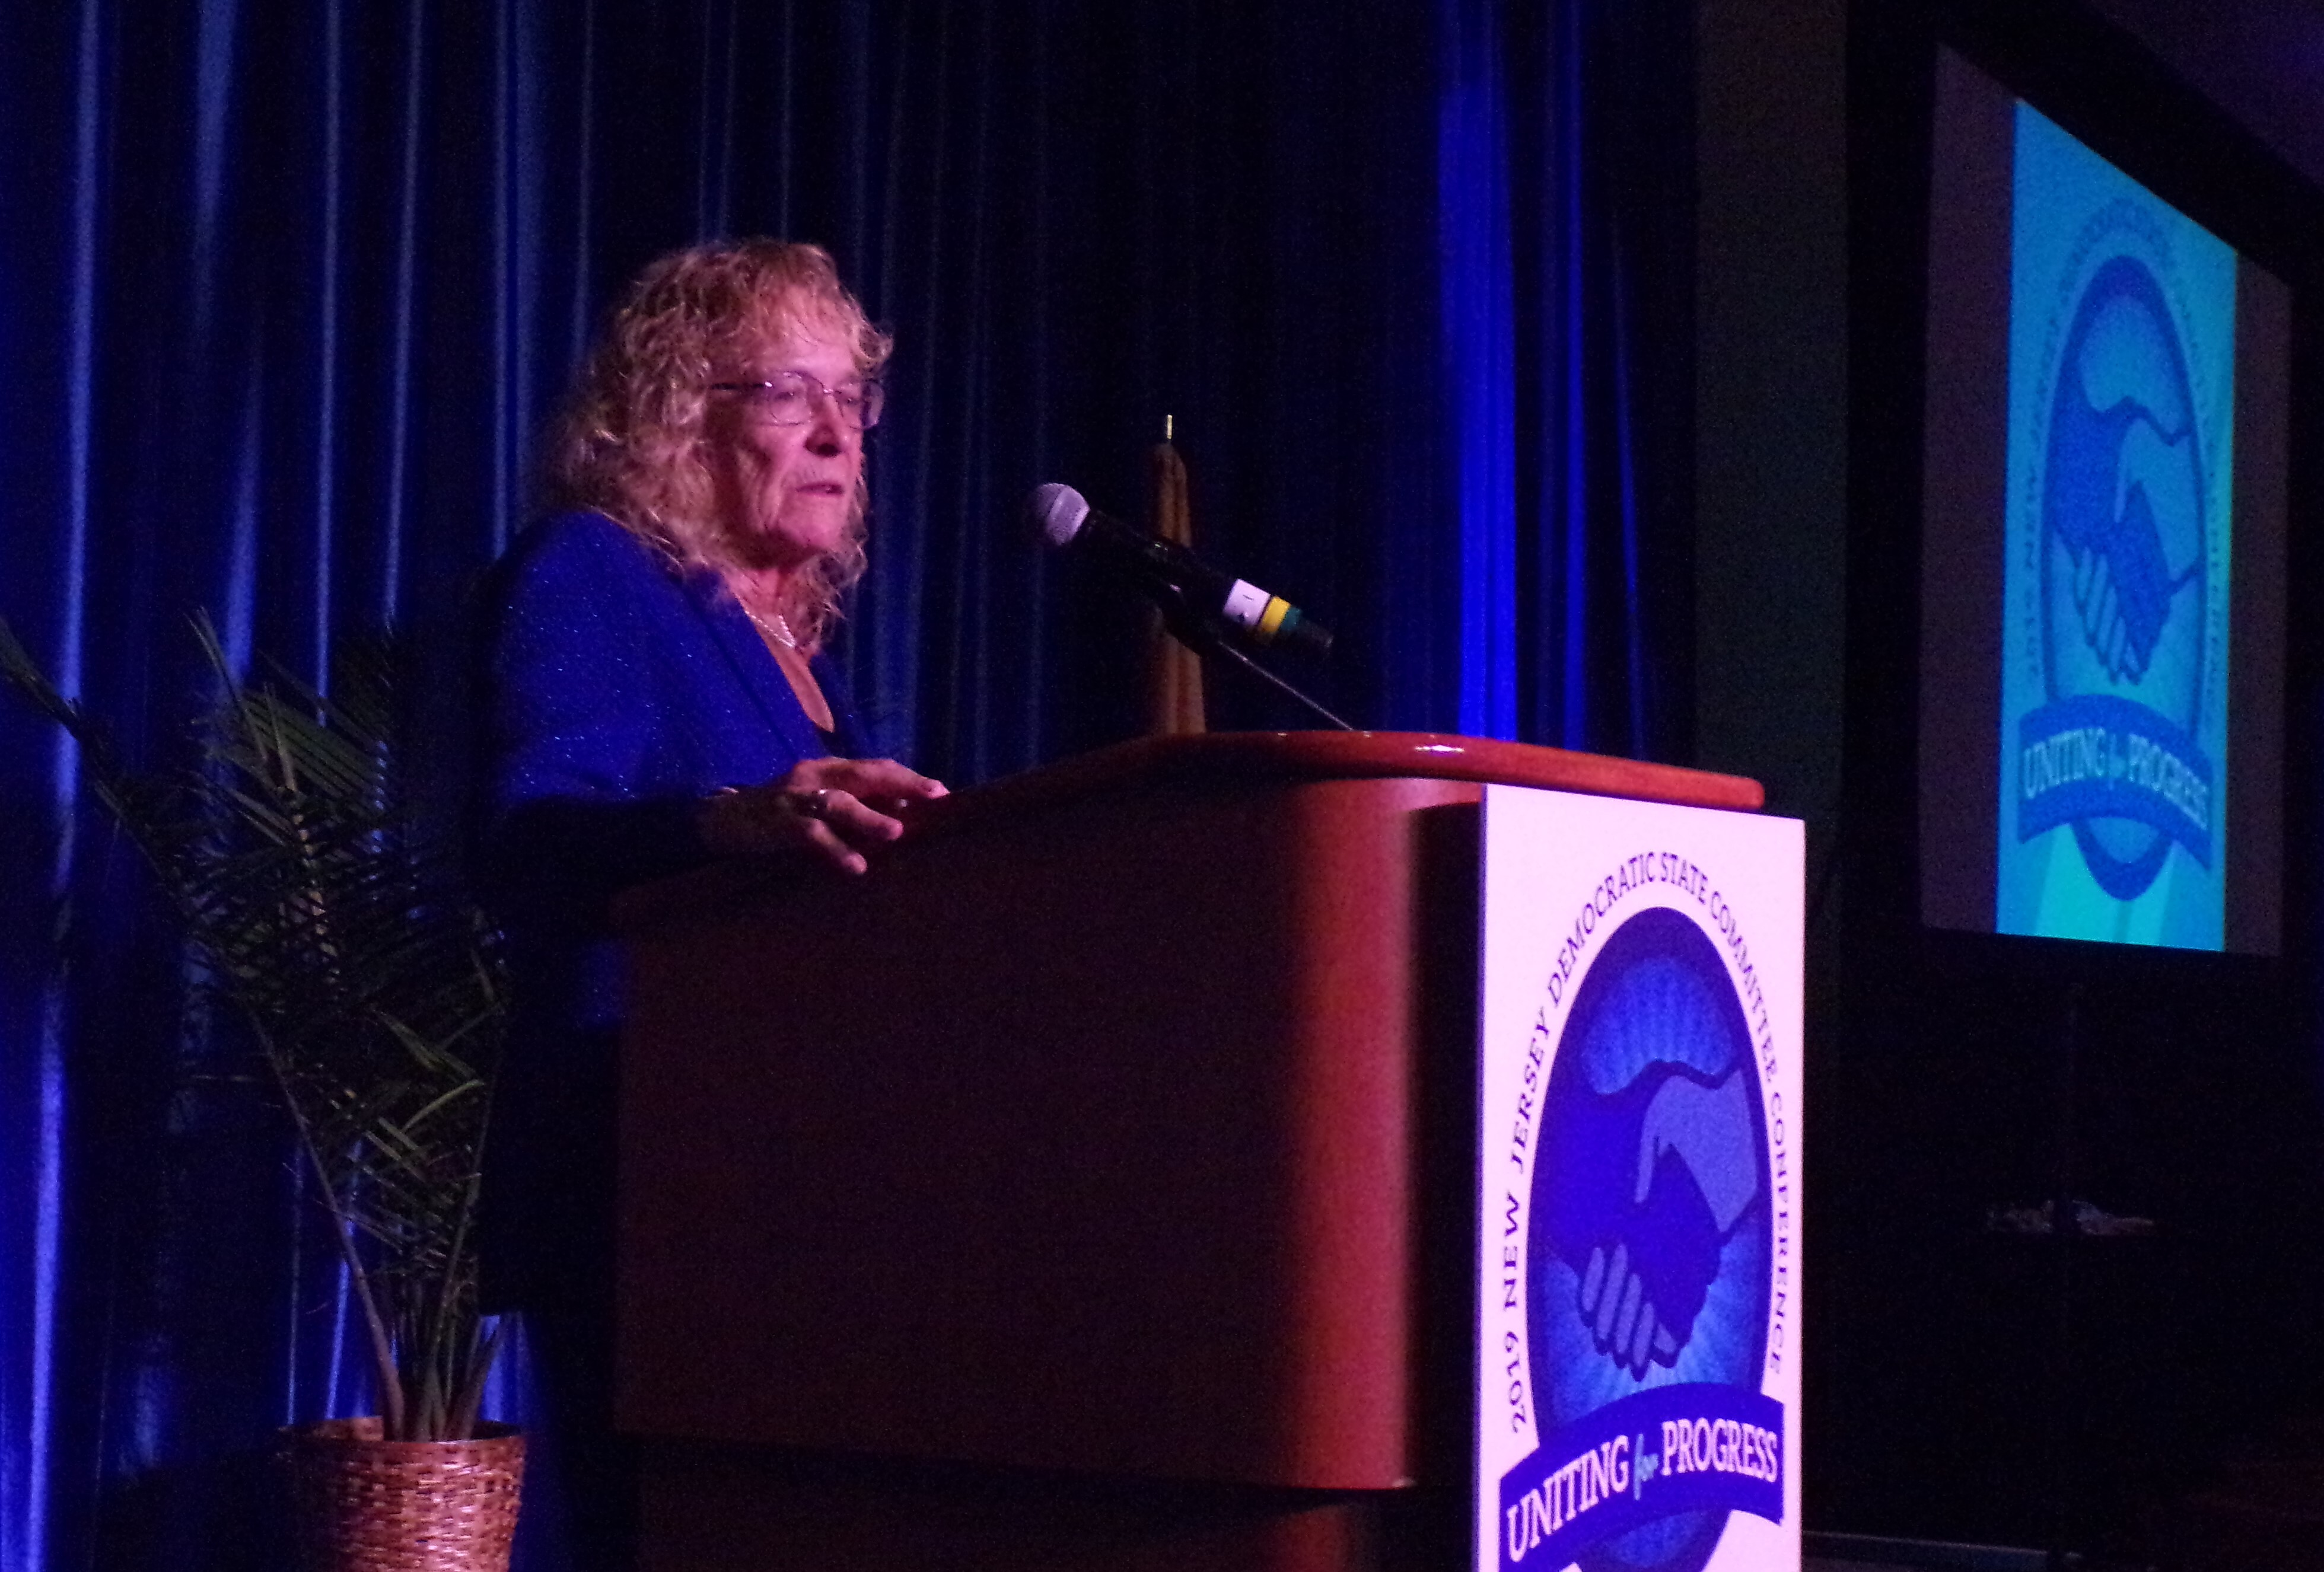 Somerset County Democratic Committee Chair (and Democratic State Party Vice Chair) Peg Schaffer at the podium to launch the conference in Atlantic City last week.